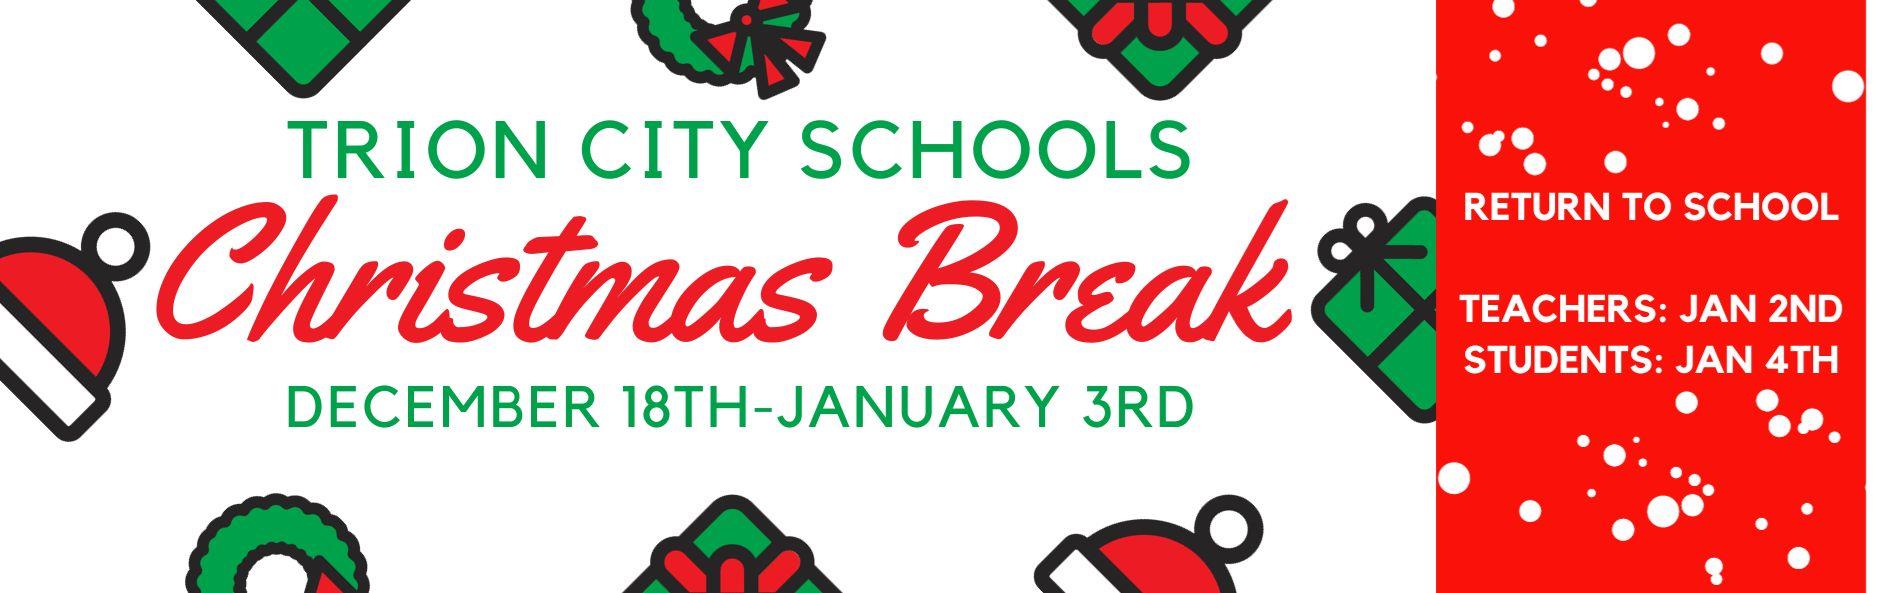 CHRISTMAS BREAK FOR STUDENTS IS FROM DECEMBER 18TH TO JANUARY 3RD. STUDENTS WILL RETURN TO SCHOOL ON JANUARY 4TH.